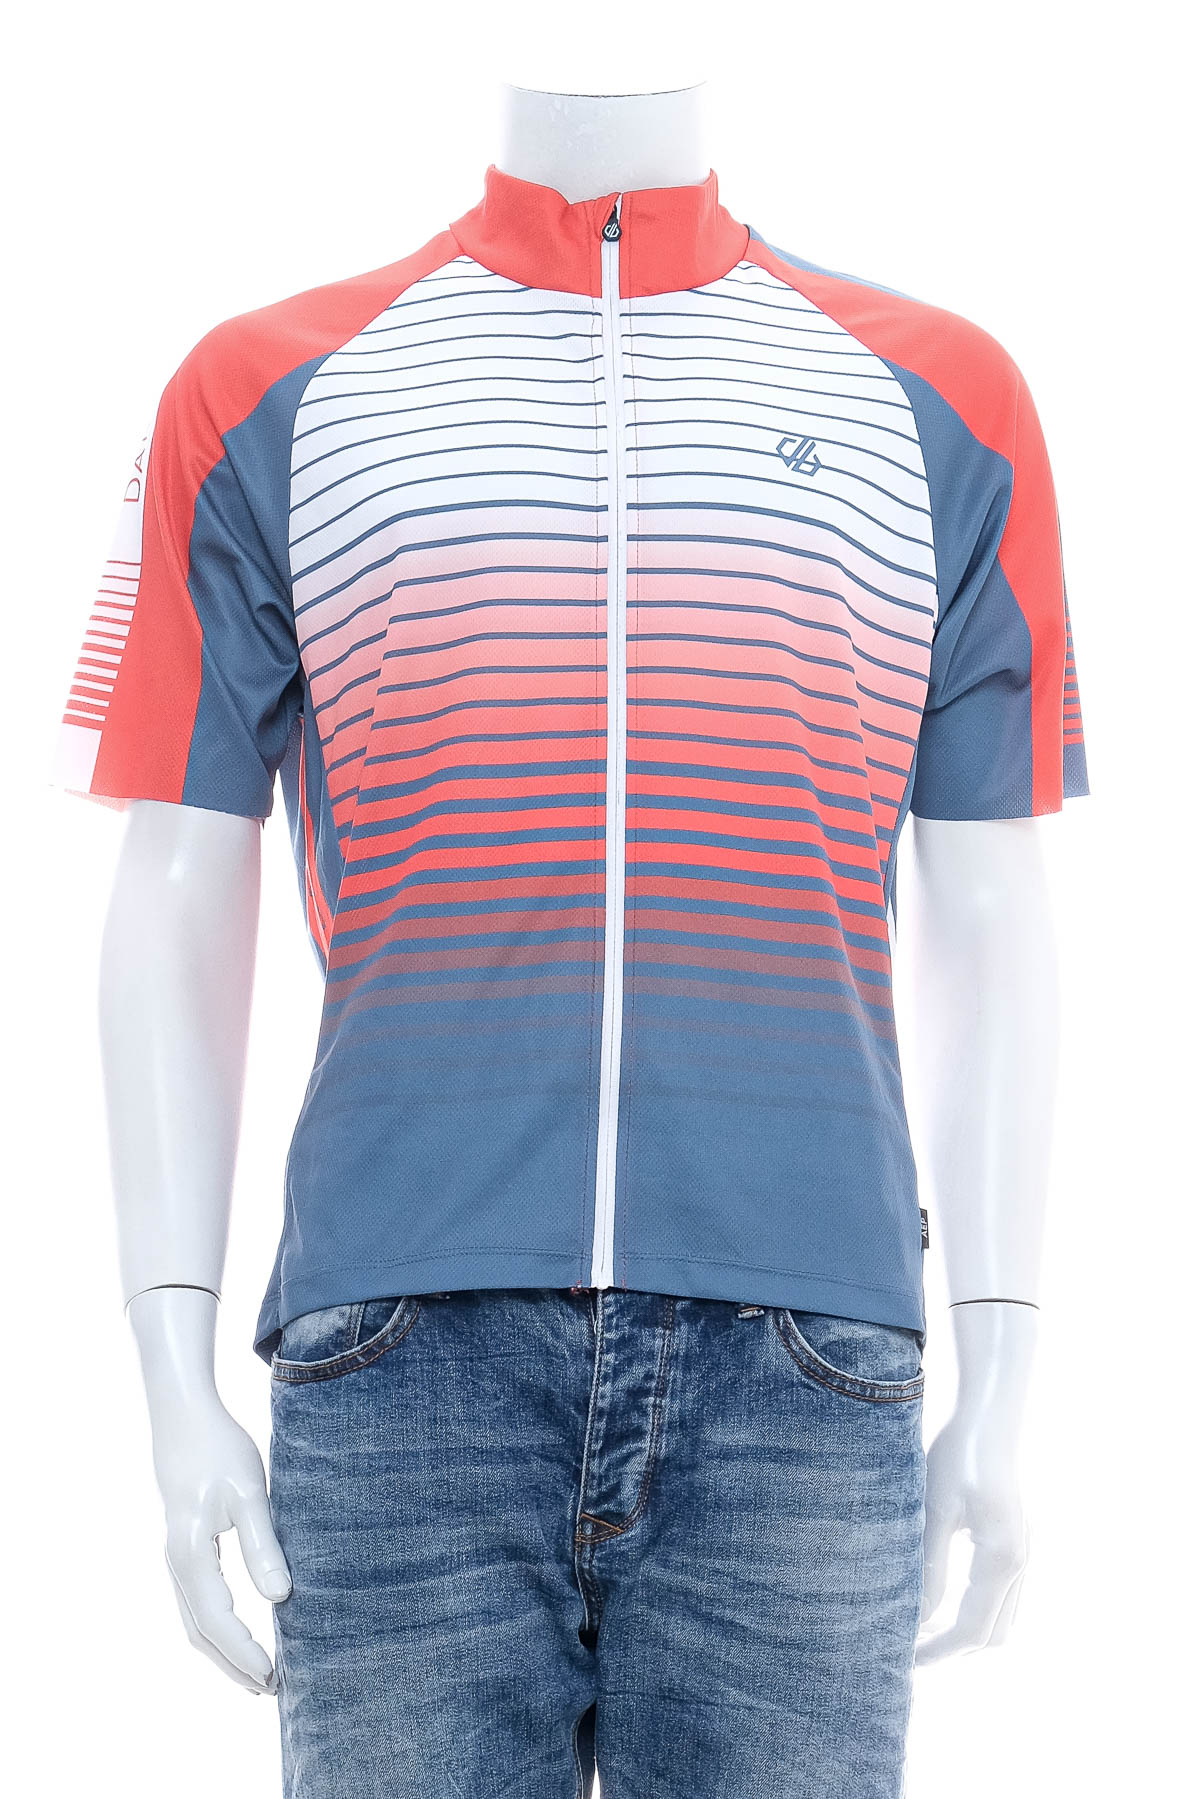 Male sports top for cycling - Dare 2b - 0